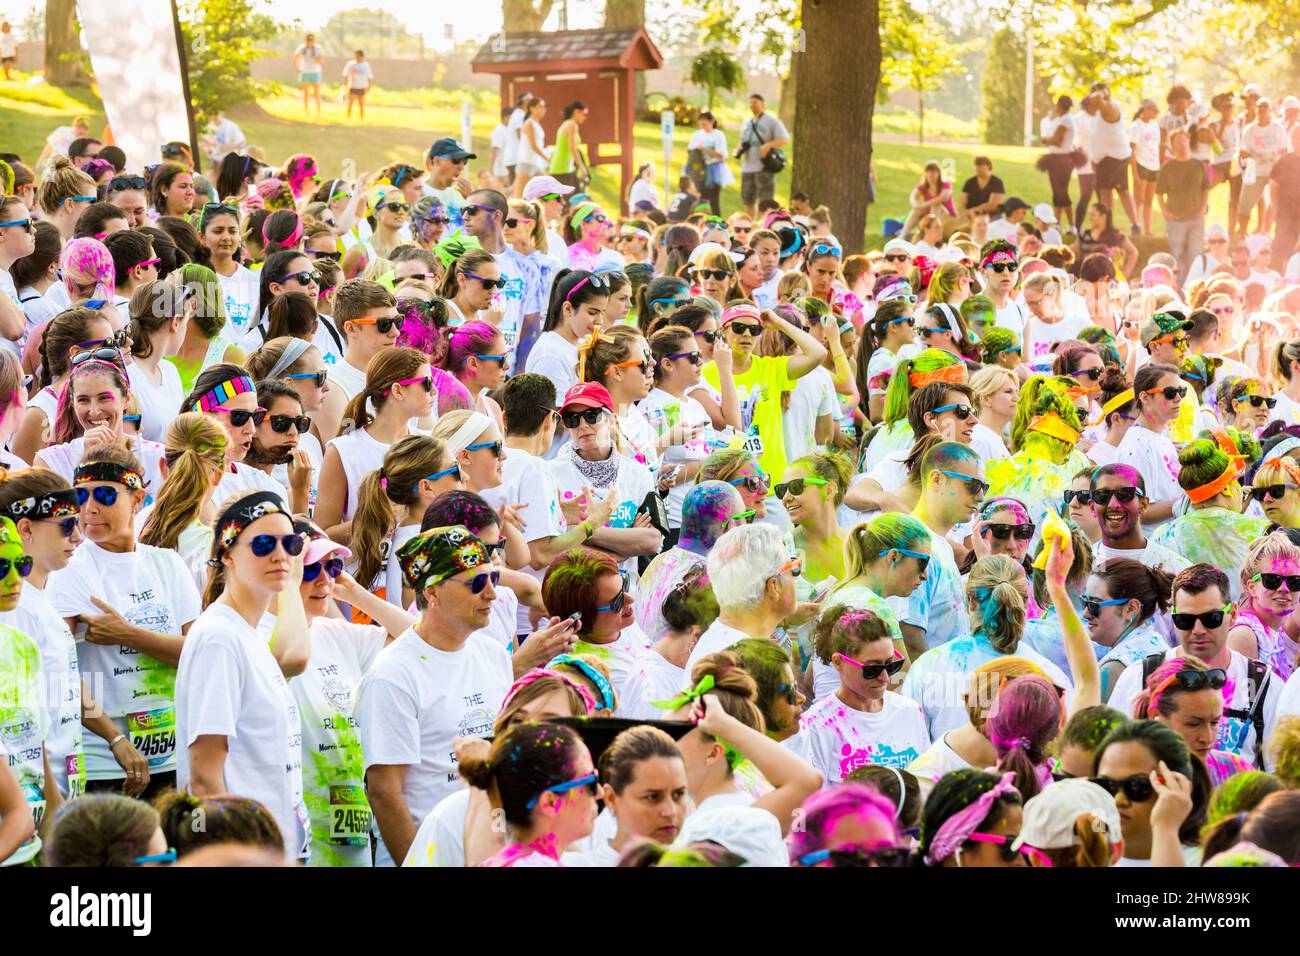 Runners wait for the start of the Color Vibe race Stock Photo